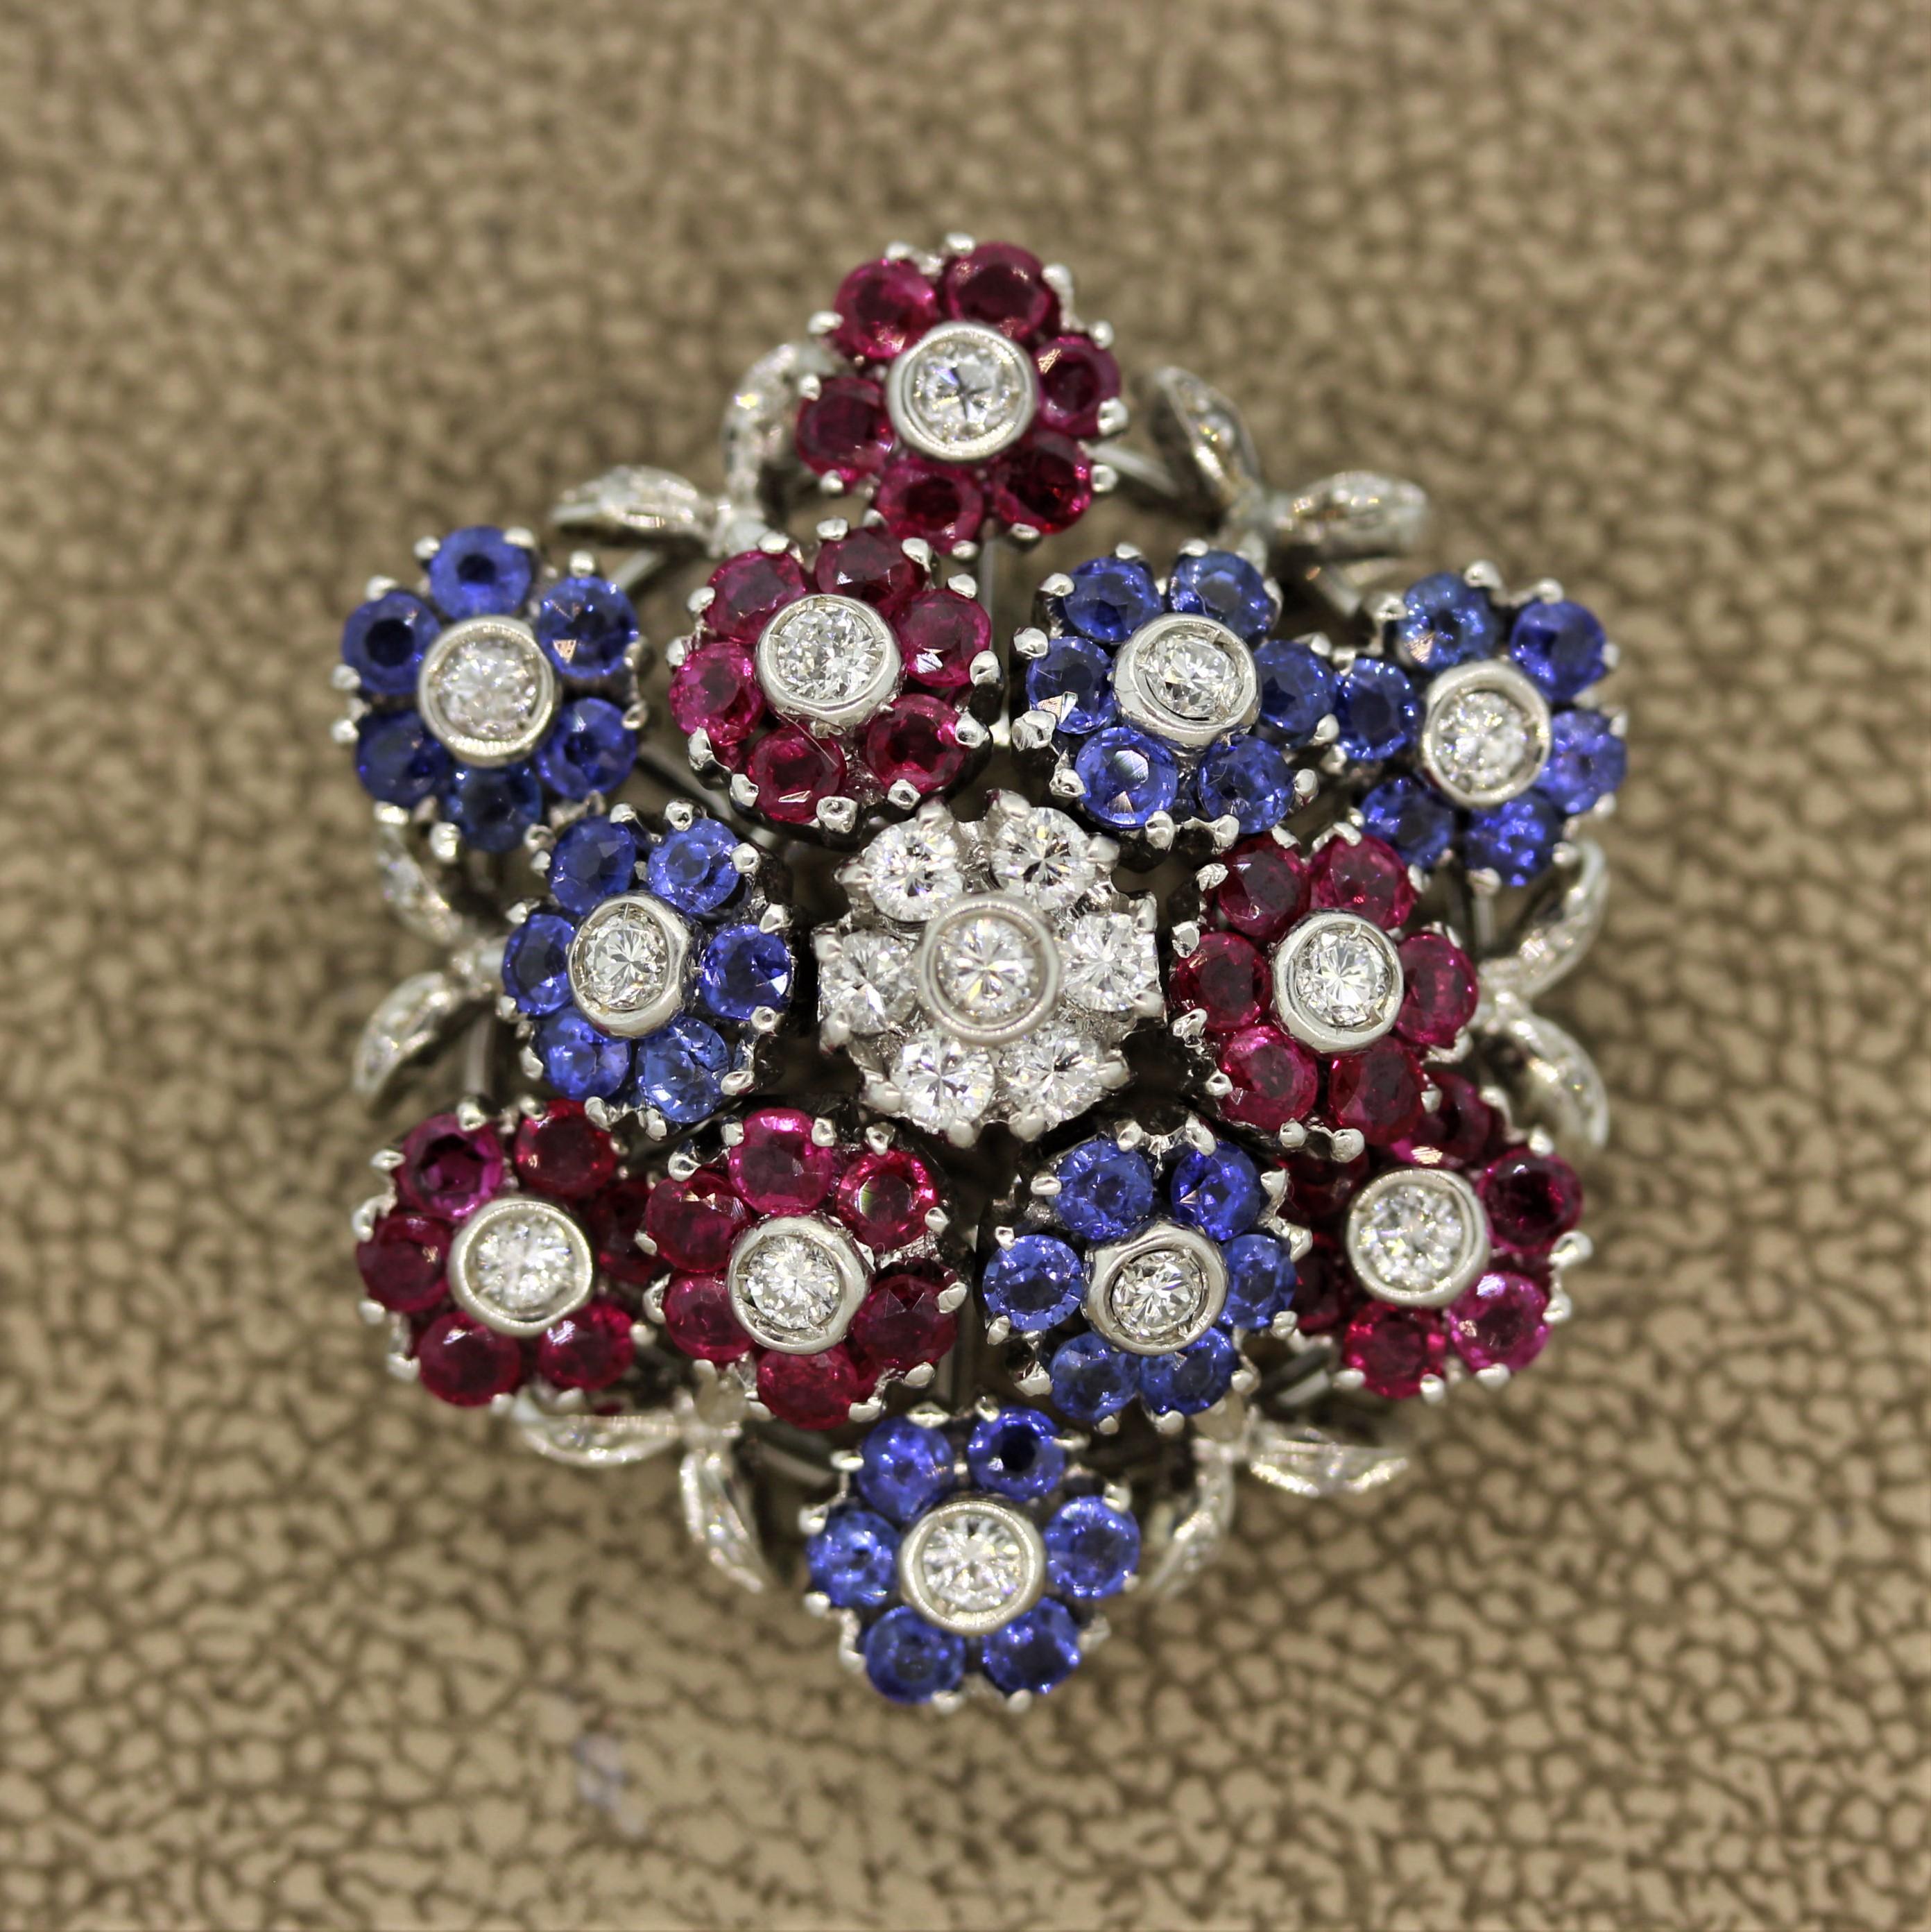 A mid-century treasure from the 1950’s, this brooch features approximately 5 carats of round cut diamonds, rubies and blue sapphires. They are set in 18k white gold in a unique setting that allows each individual flower to move or “tremble” in